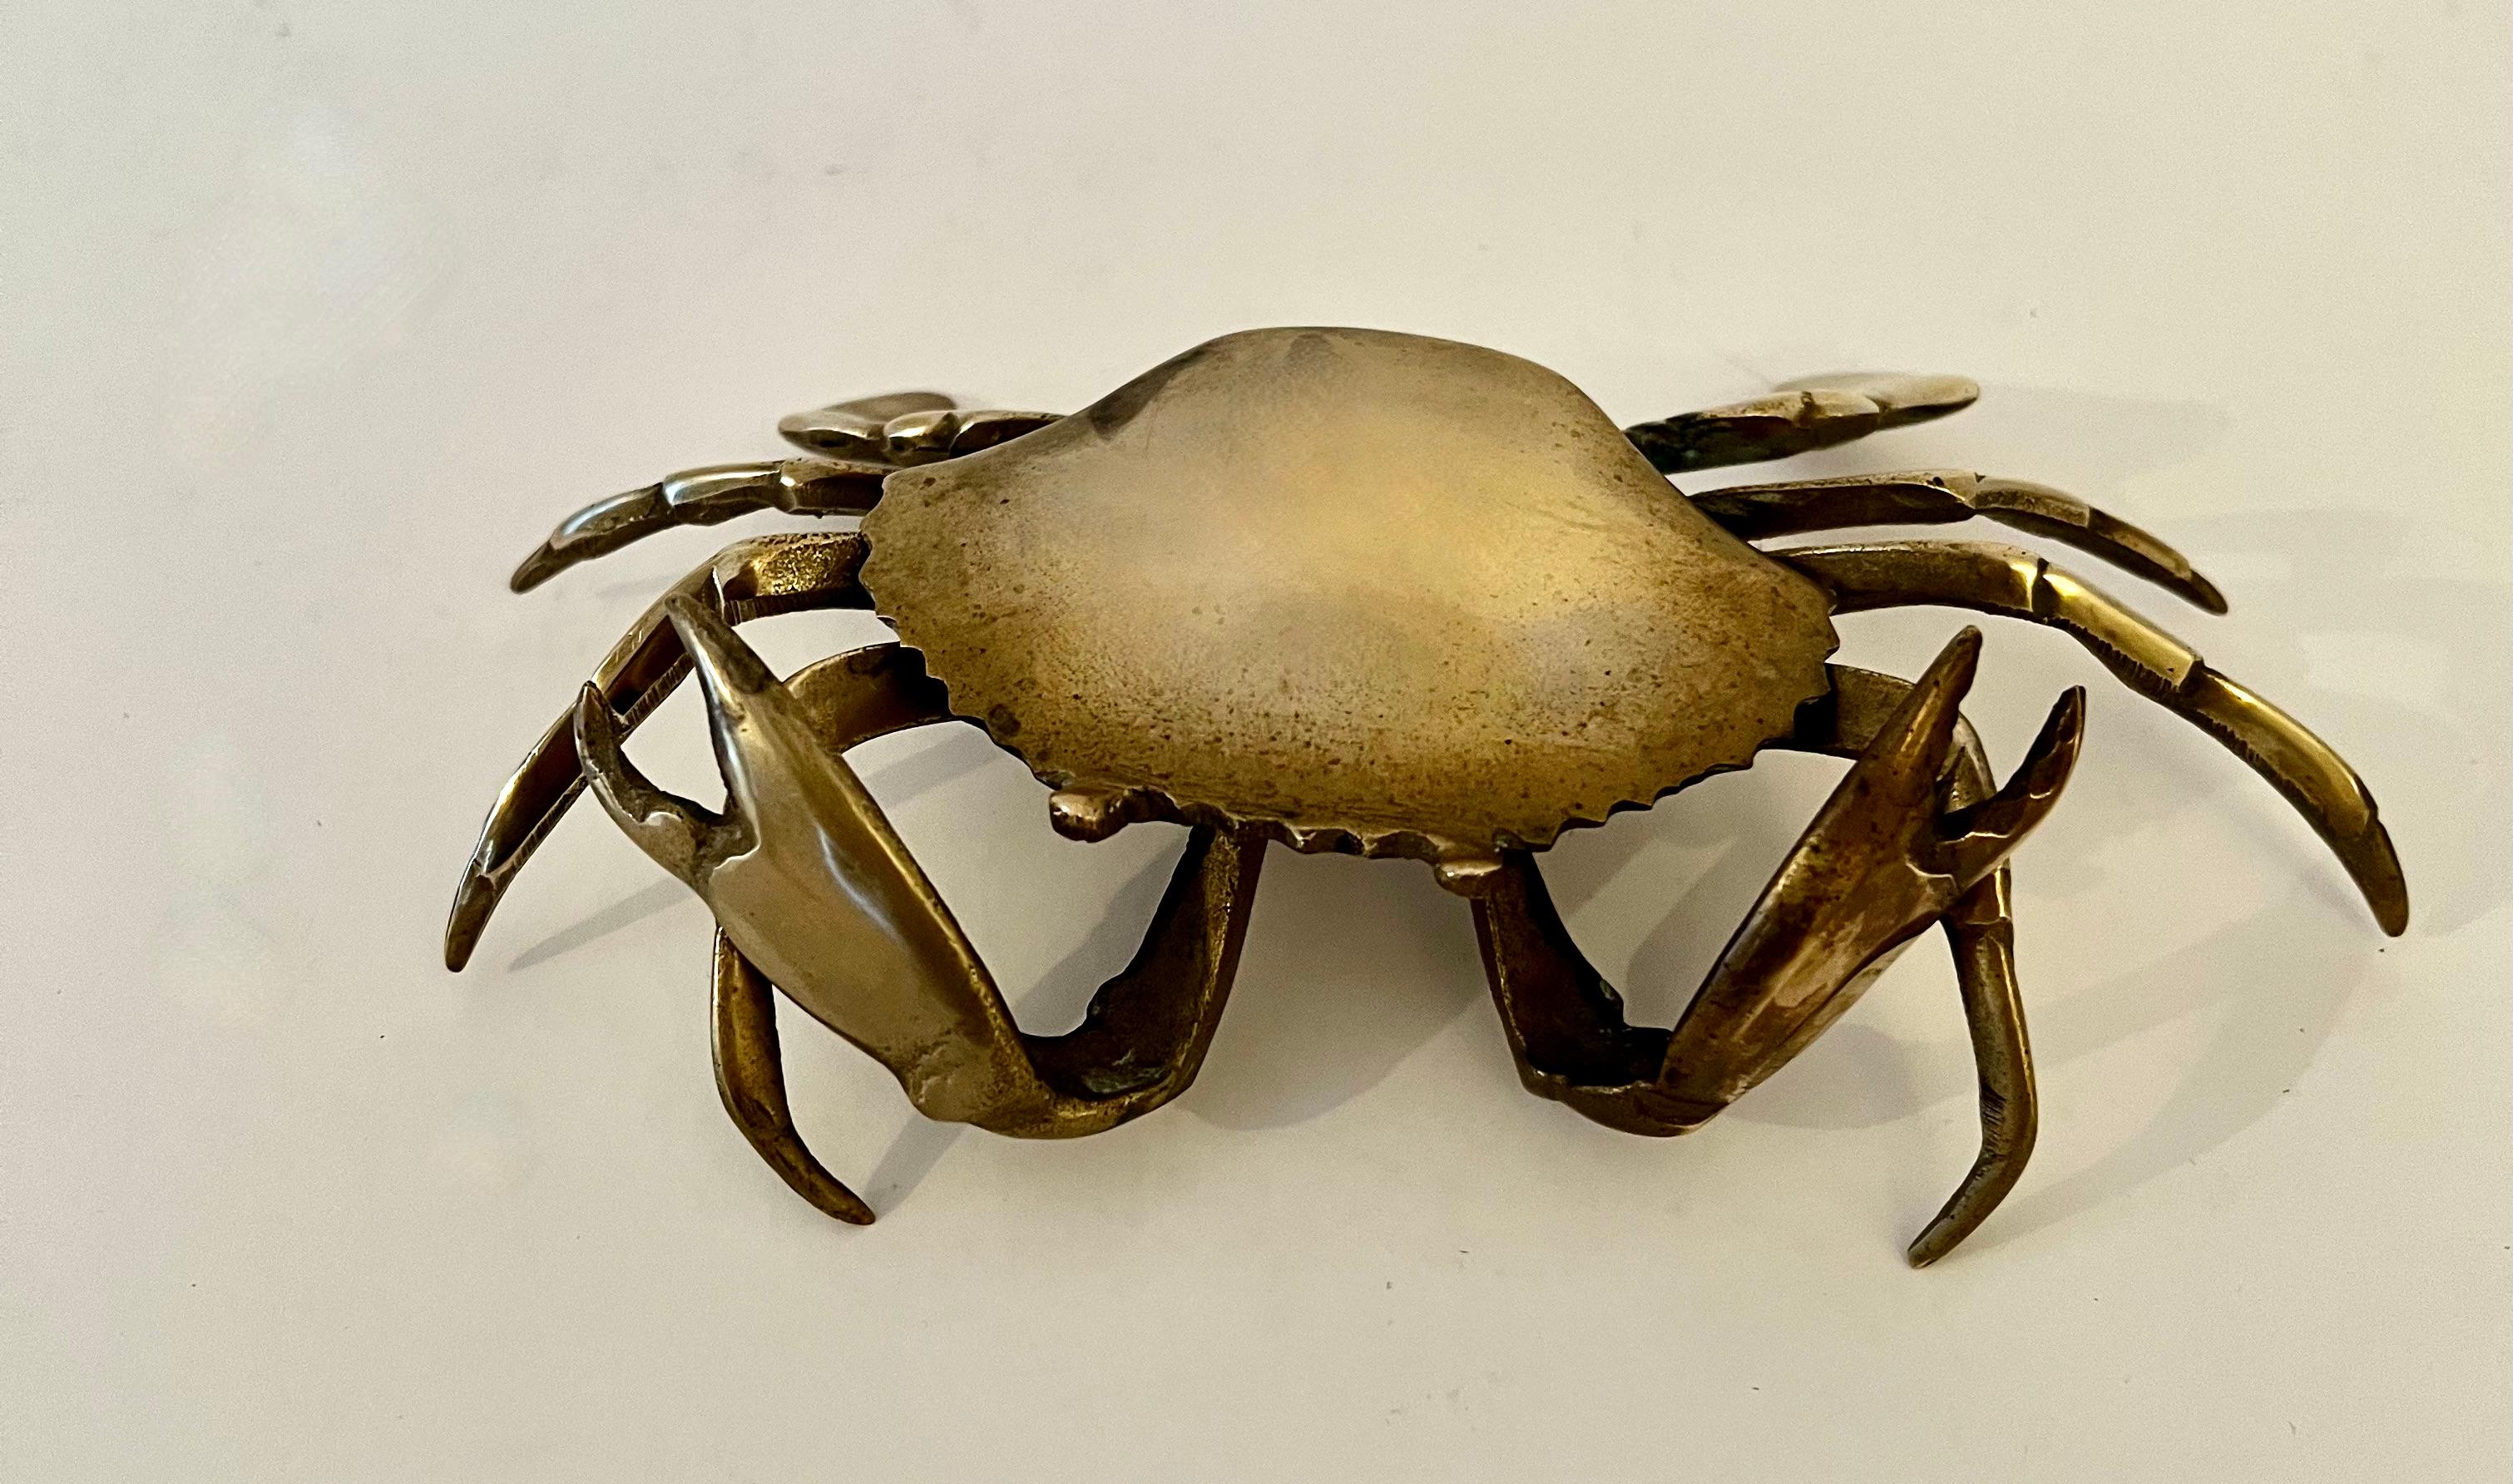 A small Cancer Crab that serves as a decorative item or for use as an ashtray or 420 tray. The brass is patinated but can be shined to a brilliant gold.

A compliment to many spaces and especially those by the water or Cancers! We have two this